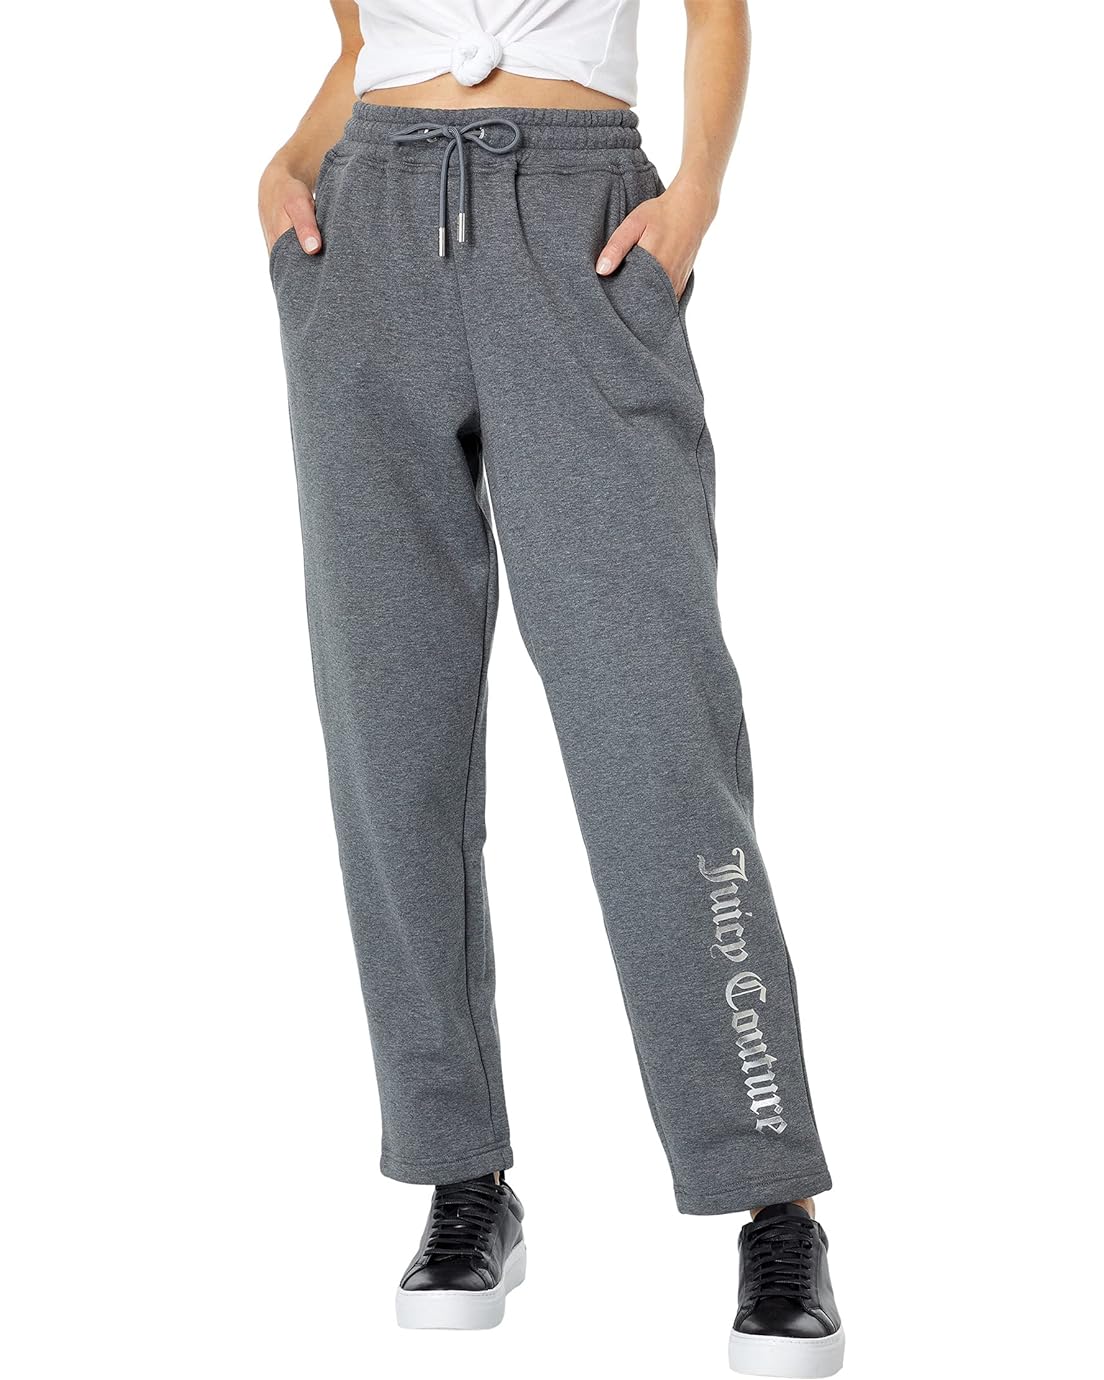 Juicy Couture Straight Leg Sherpa Pants